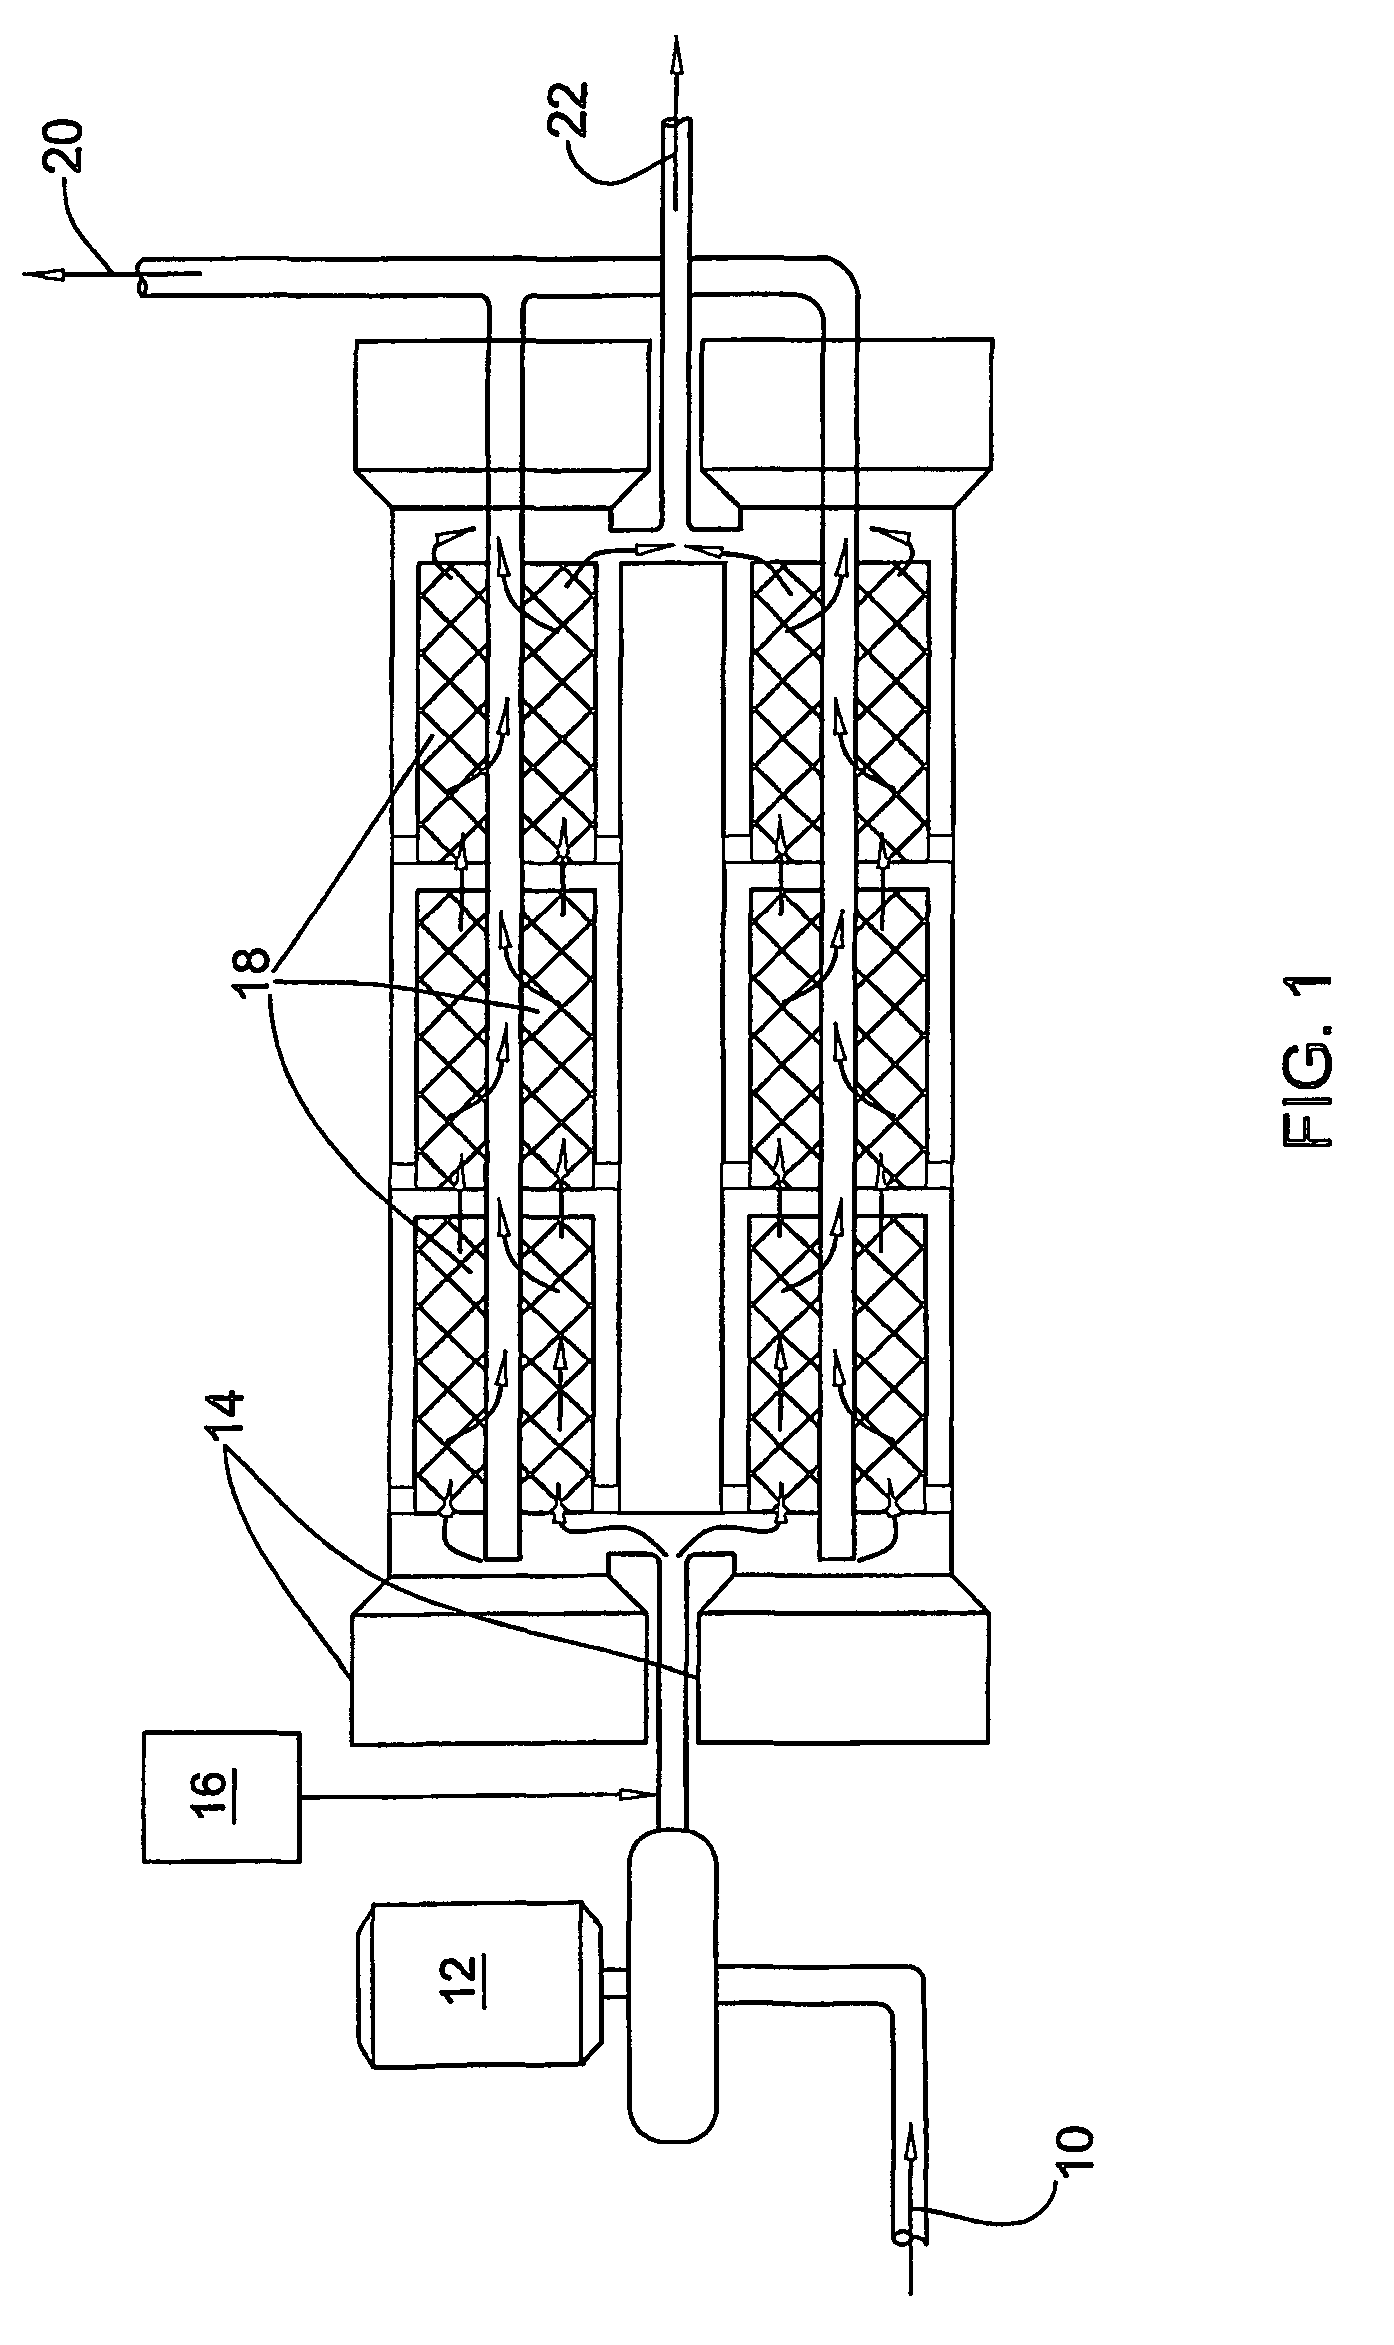 Method of boron removal in presence of magnesium ions